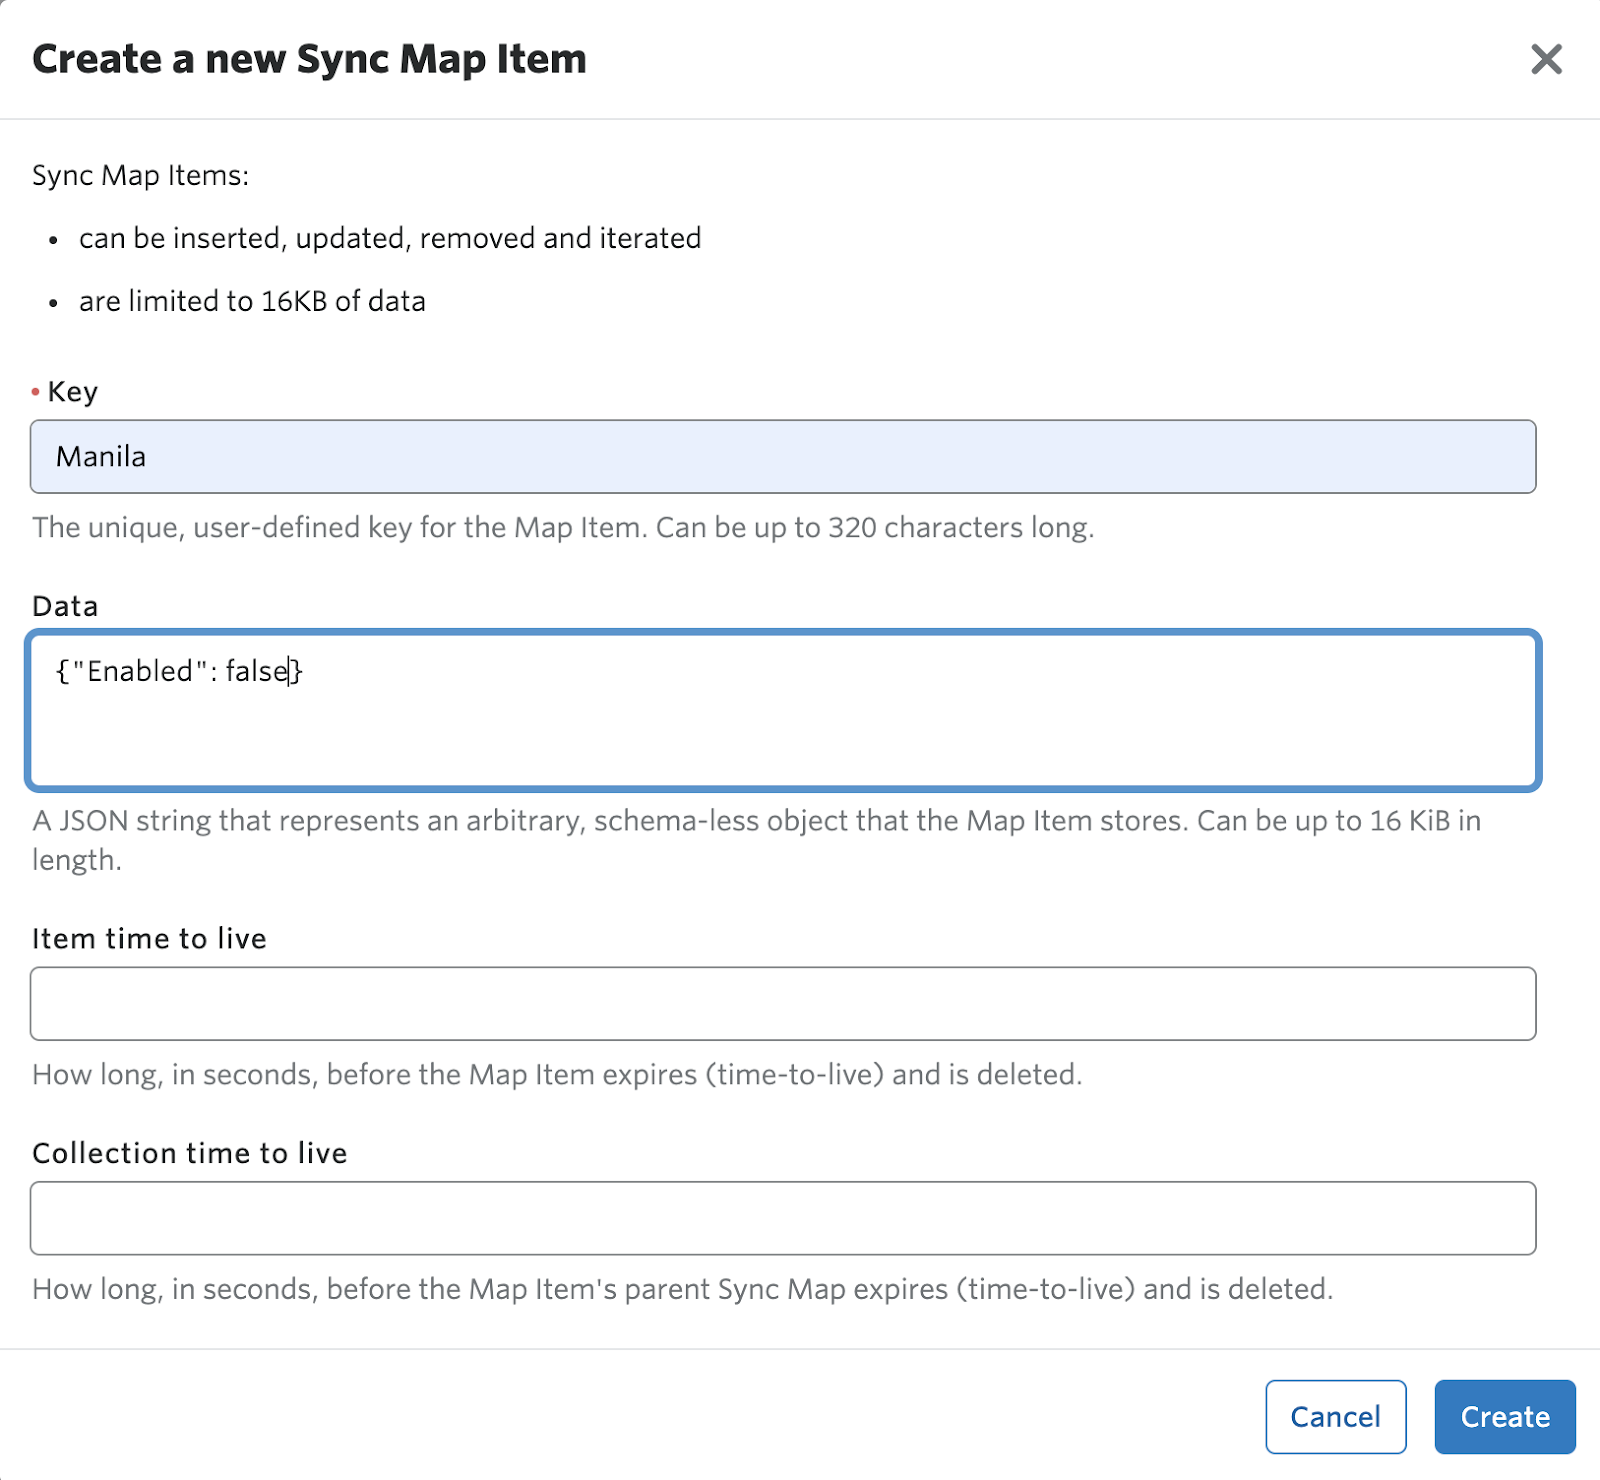 An image of the creating a new sync map item, with a focus on setting the data field as {"Enabled": false}